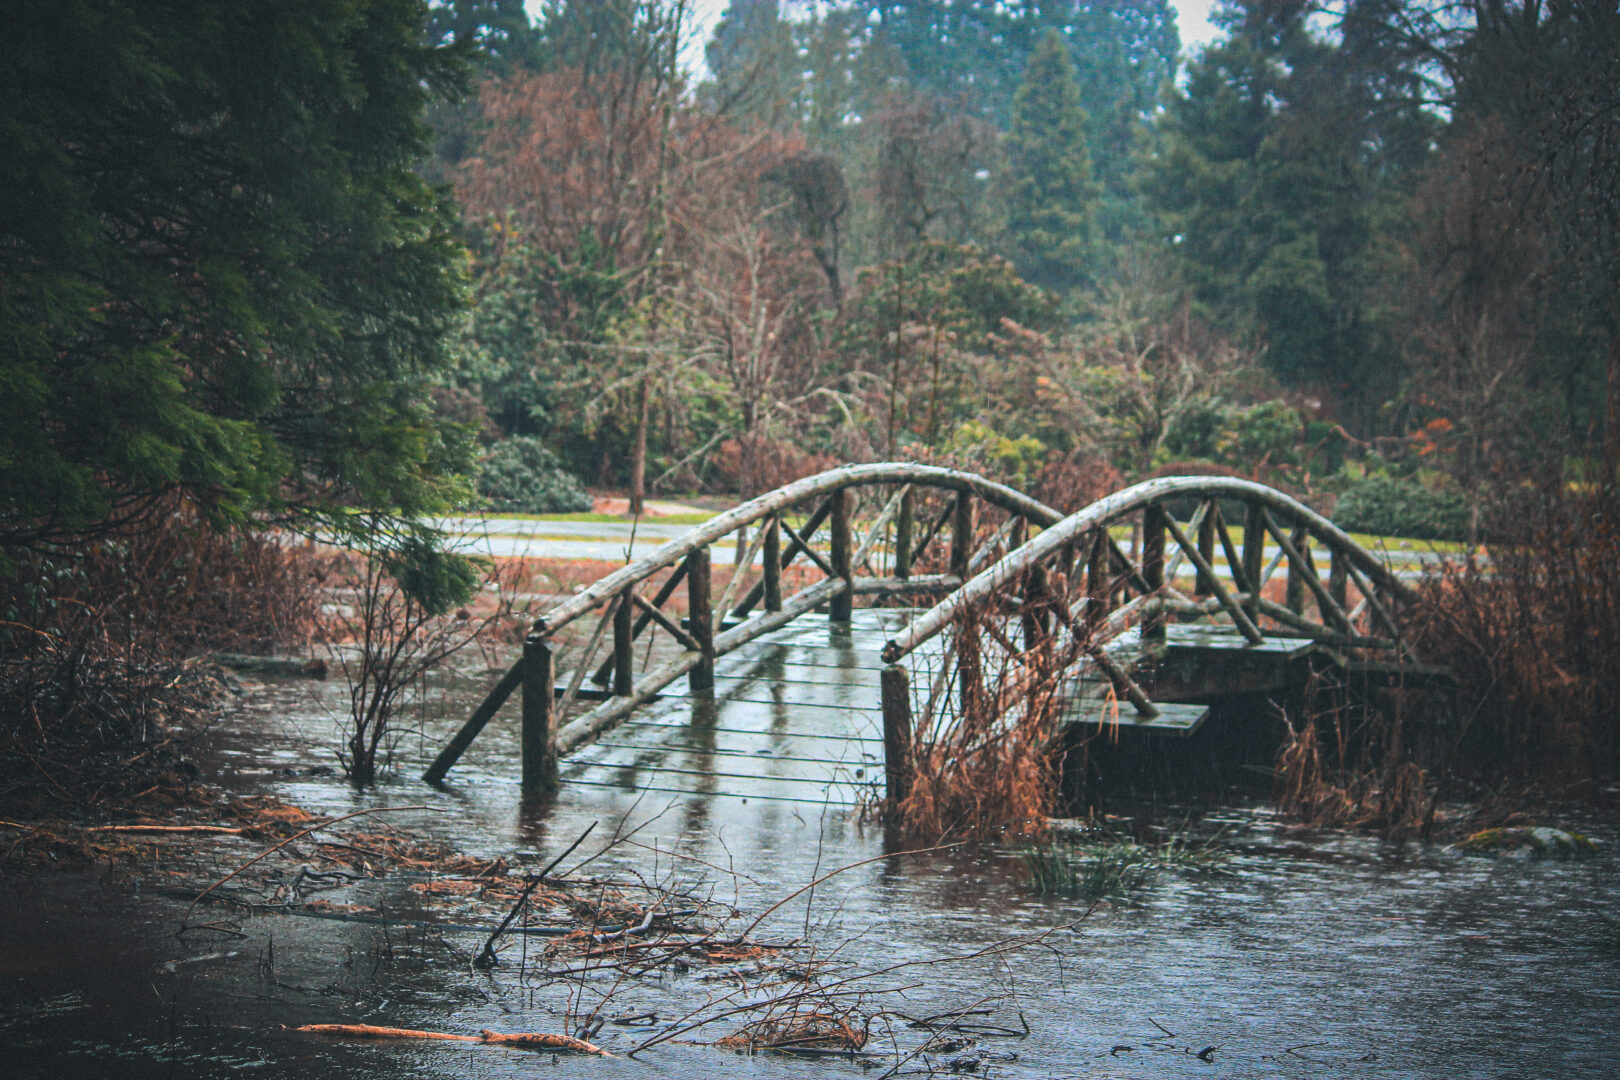 Landscape of the flooded wetland in Stanley Park